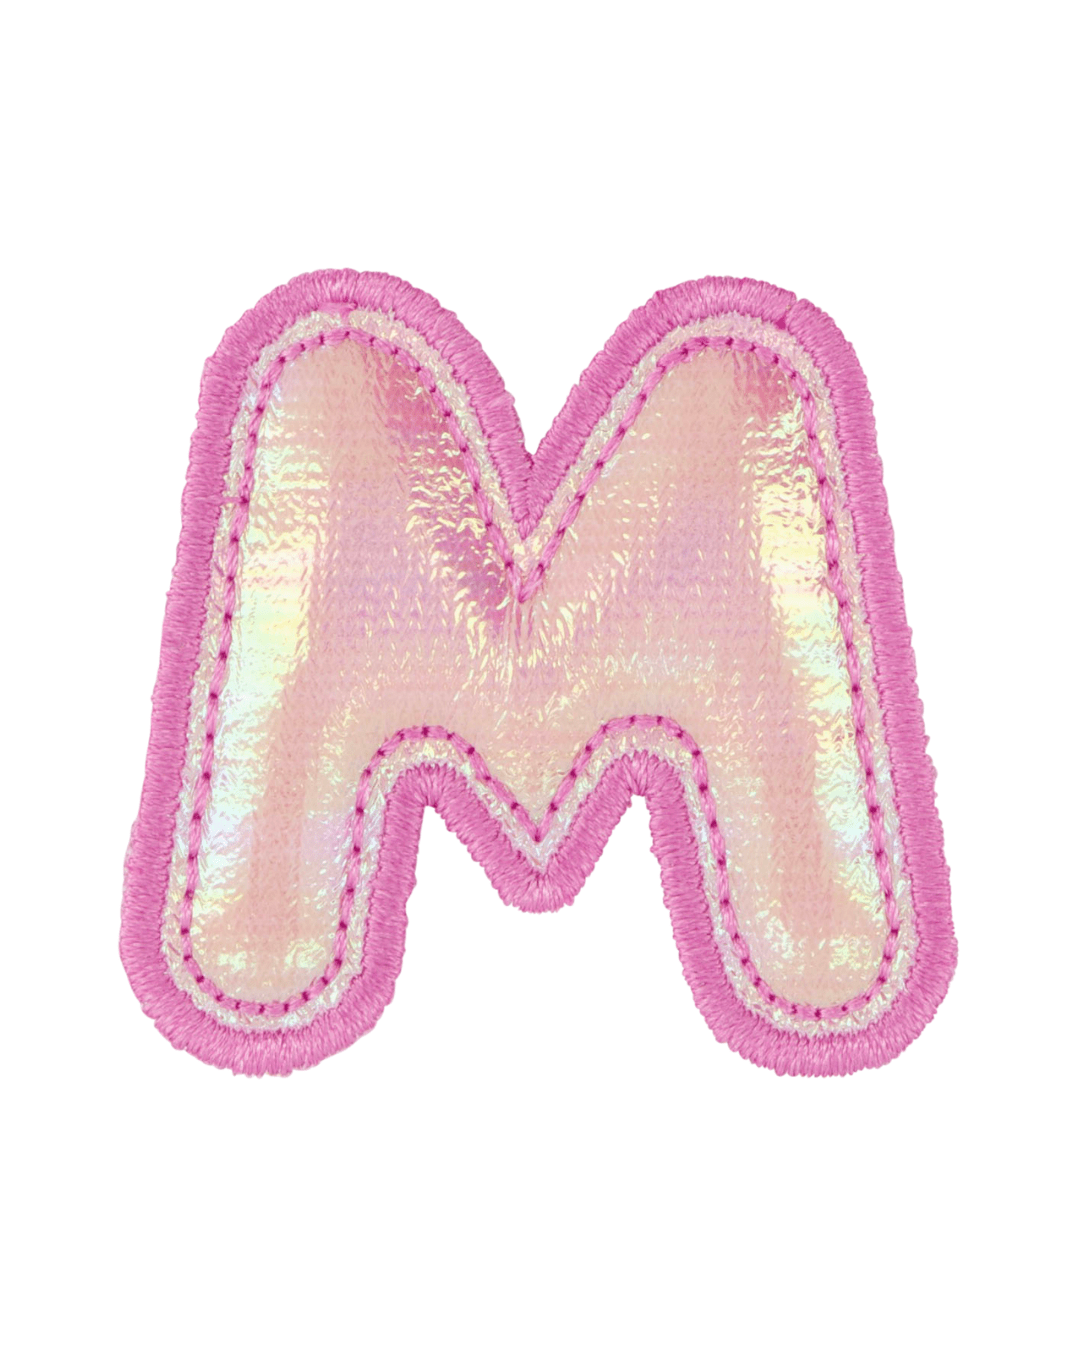 Pink Puffy Holo Letter Patch - American Deadstock